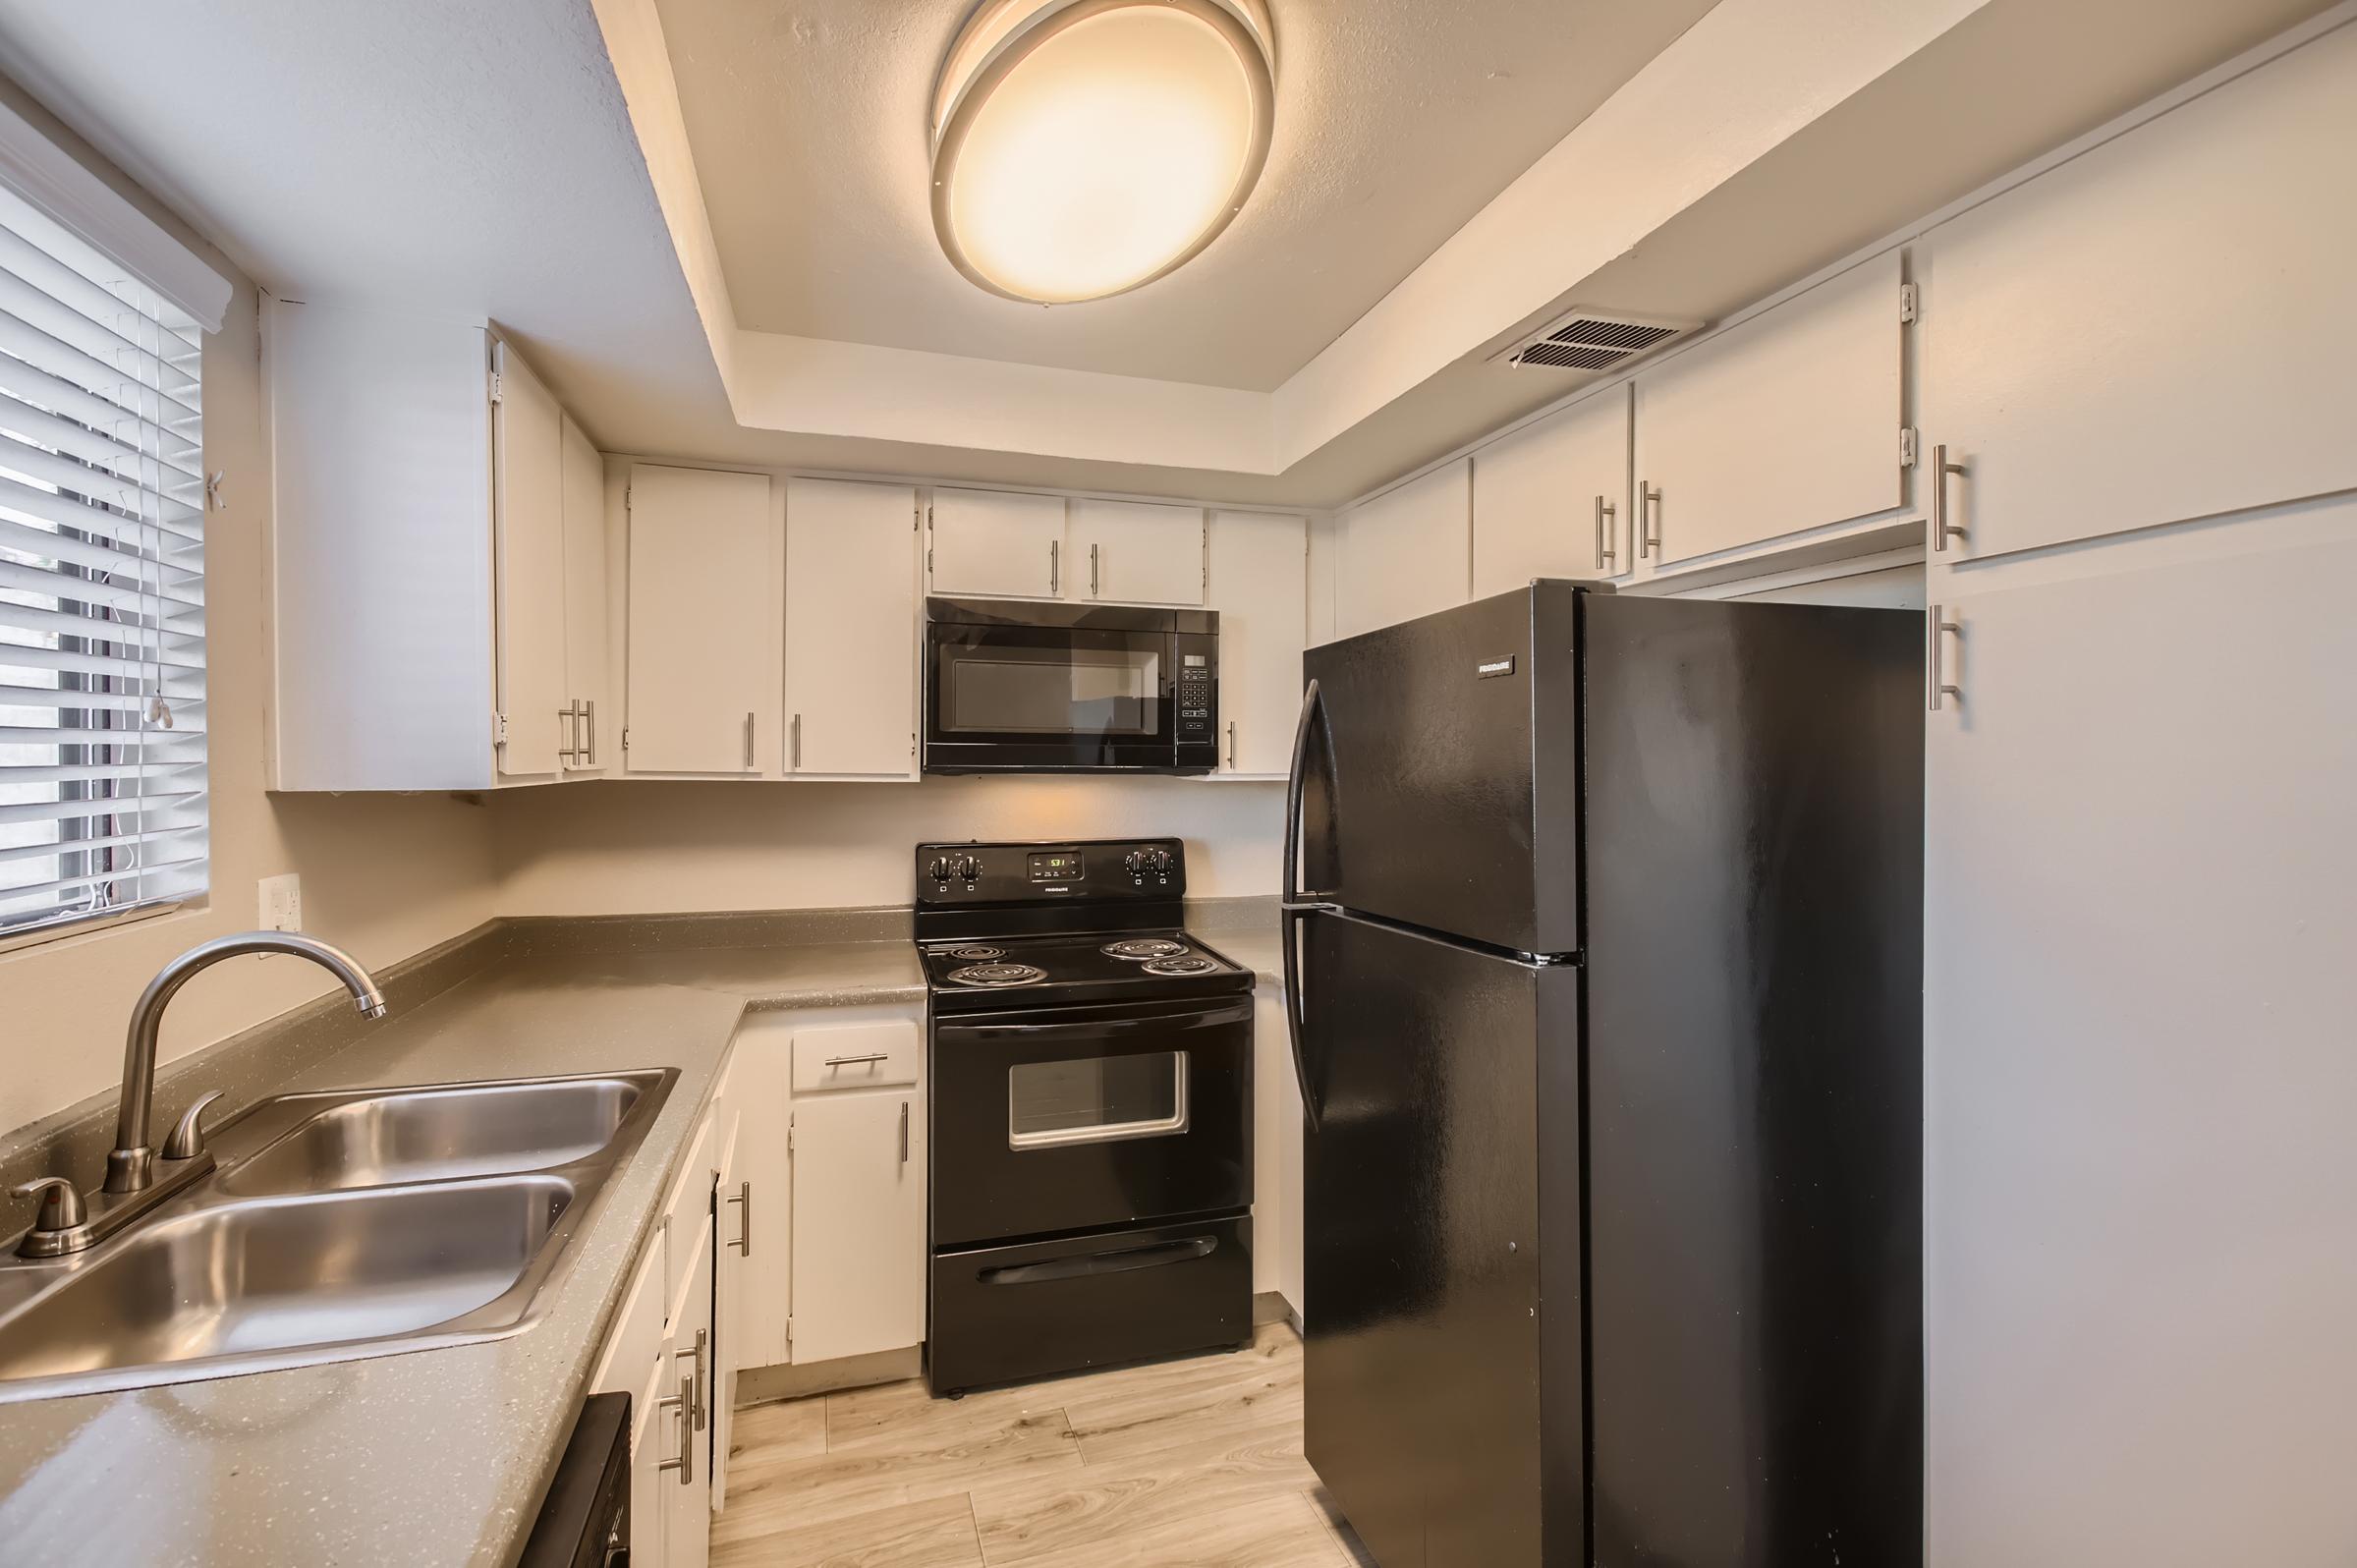 Rise Desert Cove apartment kitchen with black appliances and white cannets